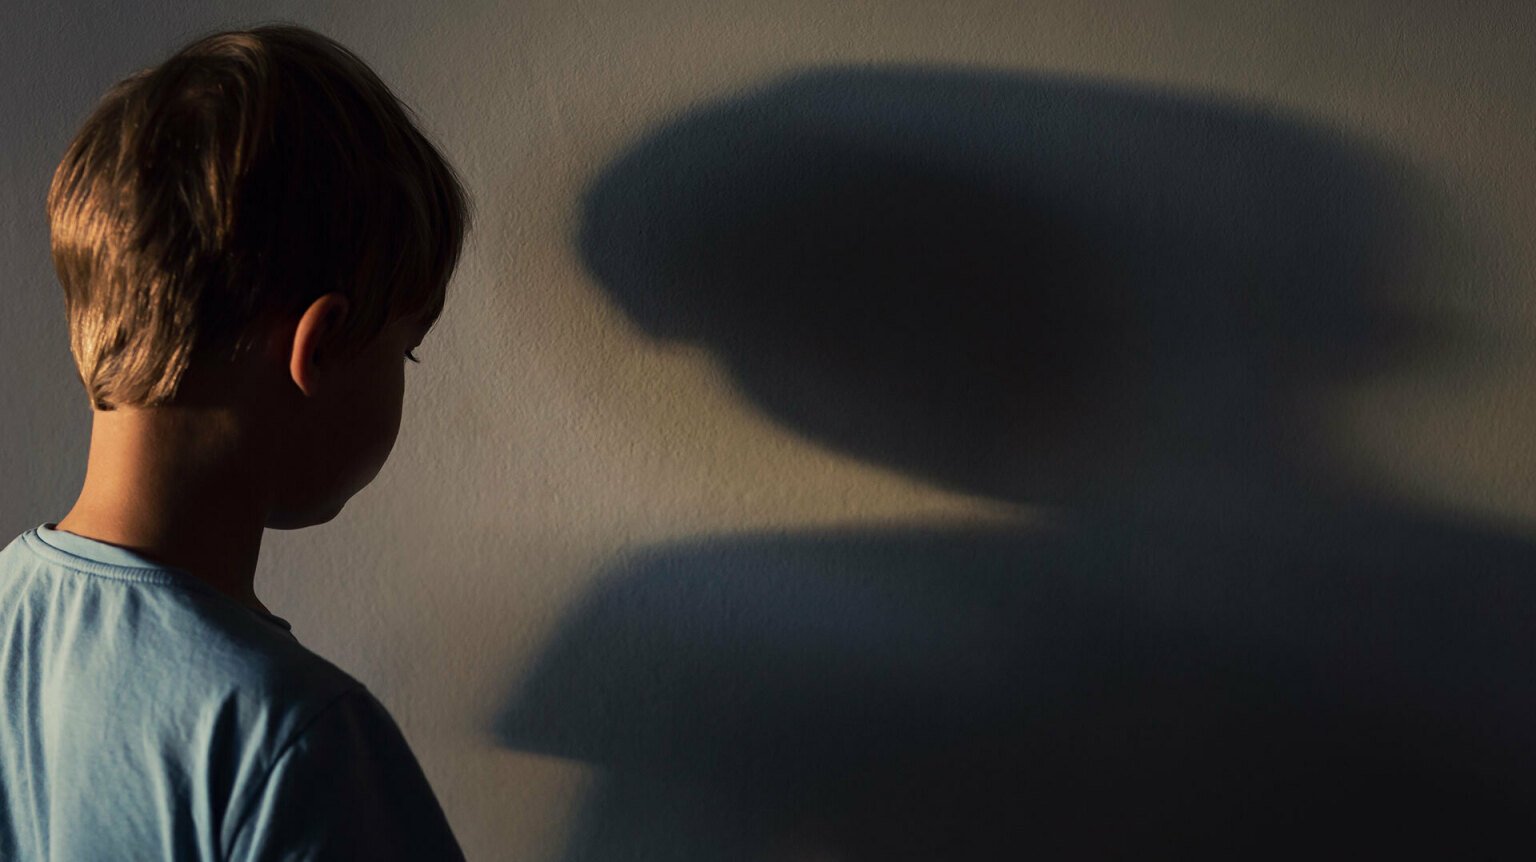 A boy looks at his shadow on a wall.